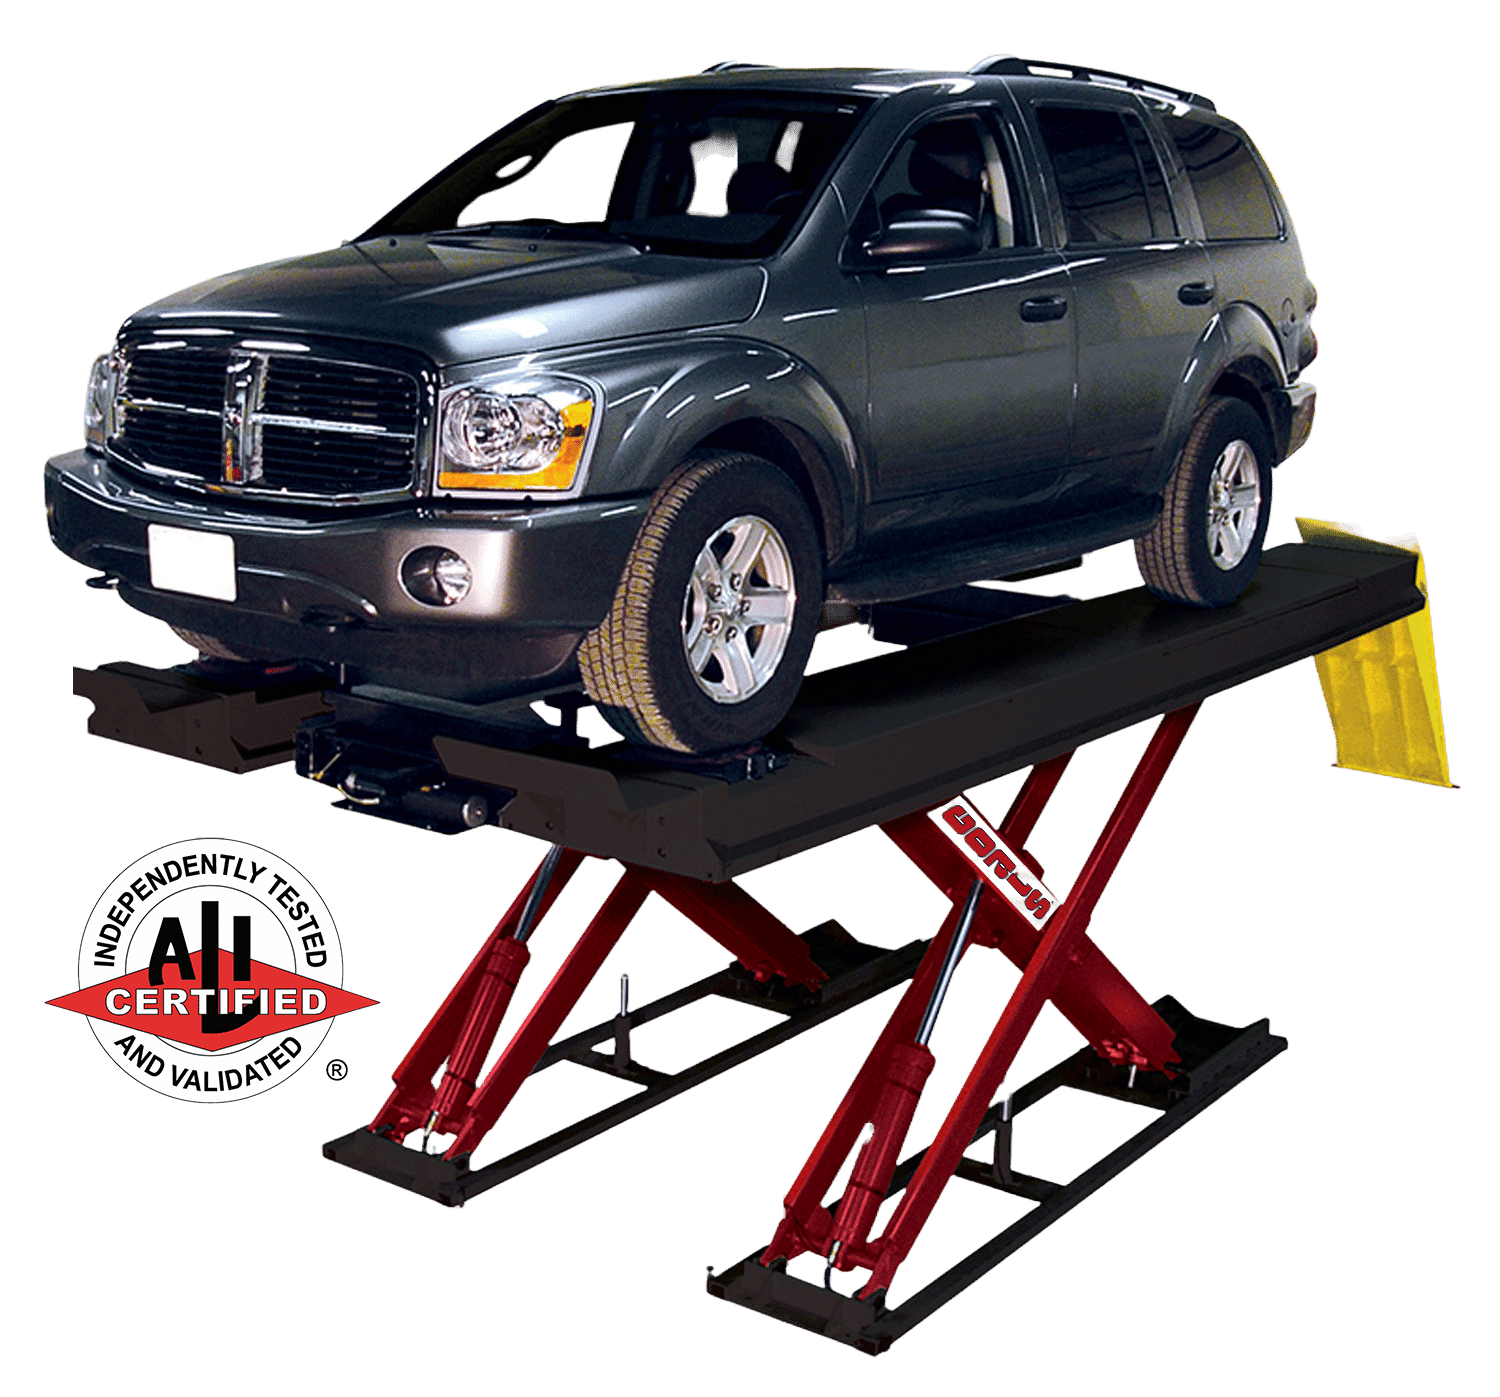 A black SUV is raised on a black and red Coats 16K alignment scissor lift with a white and red logo that says “ALI Certified”